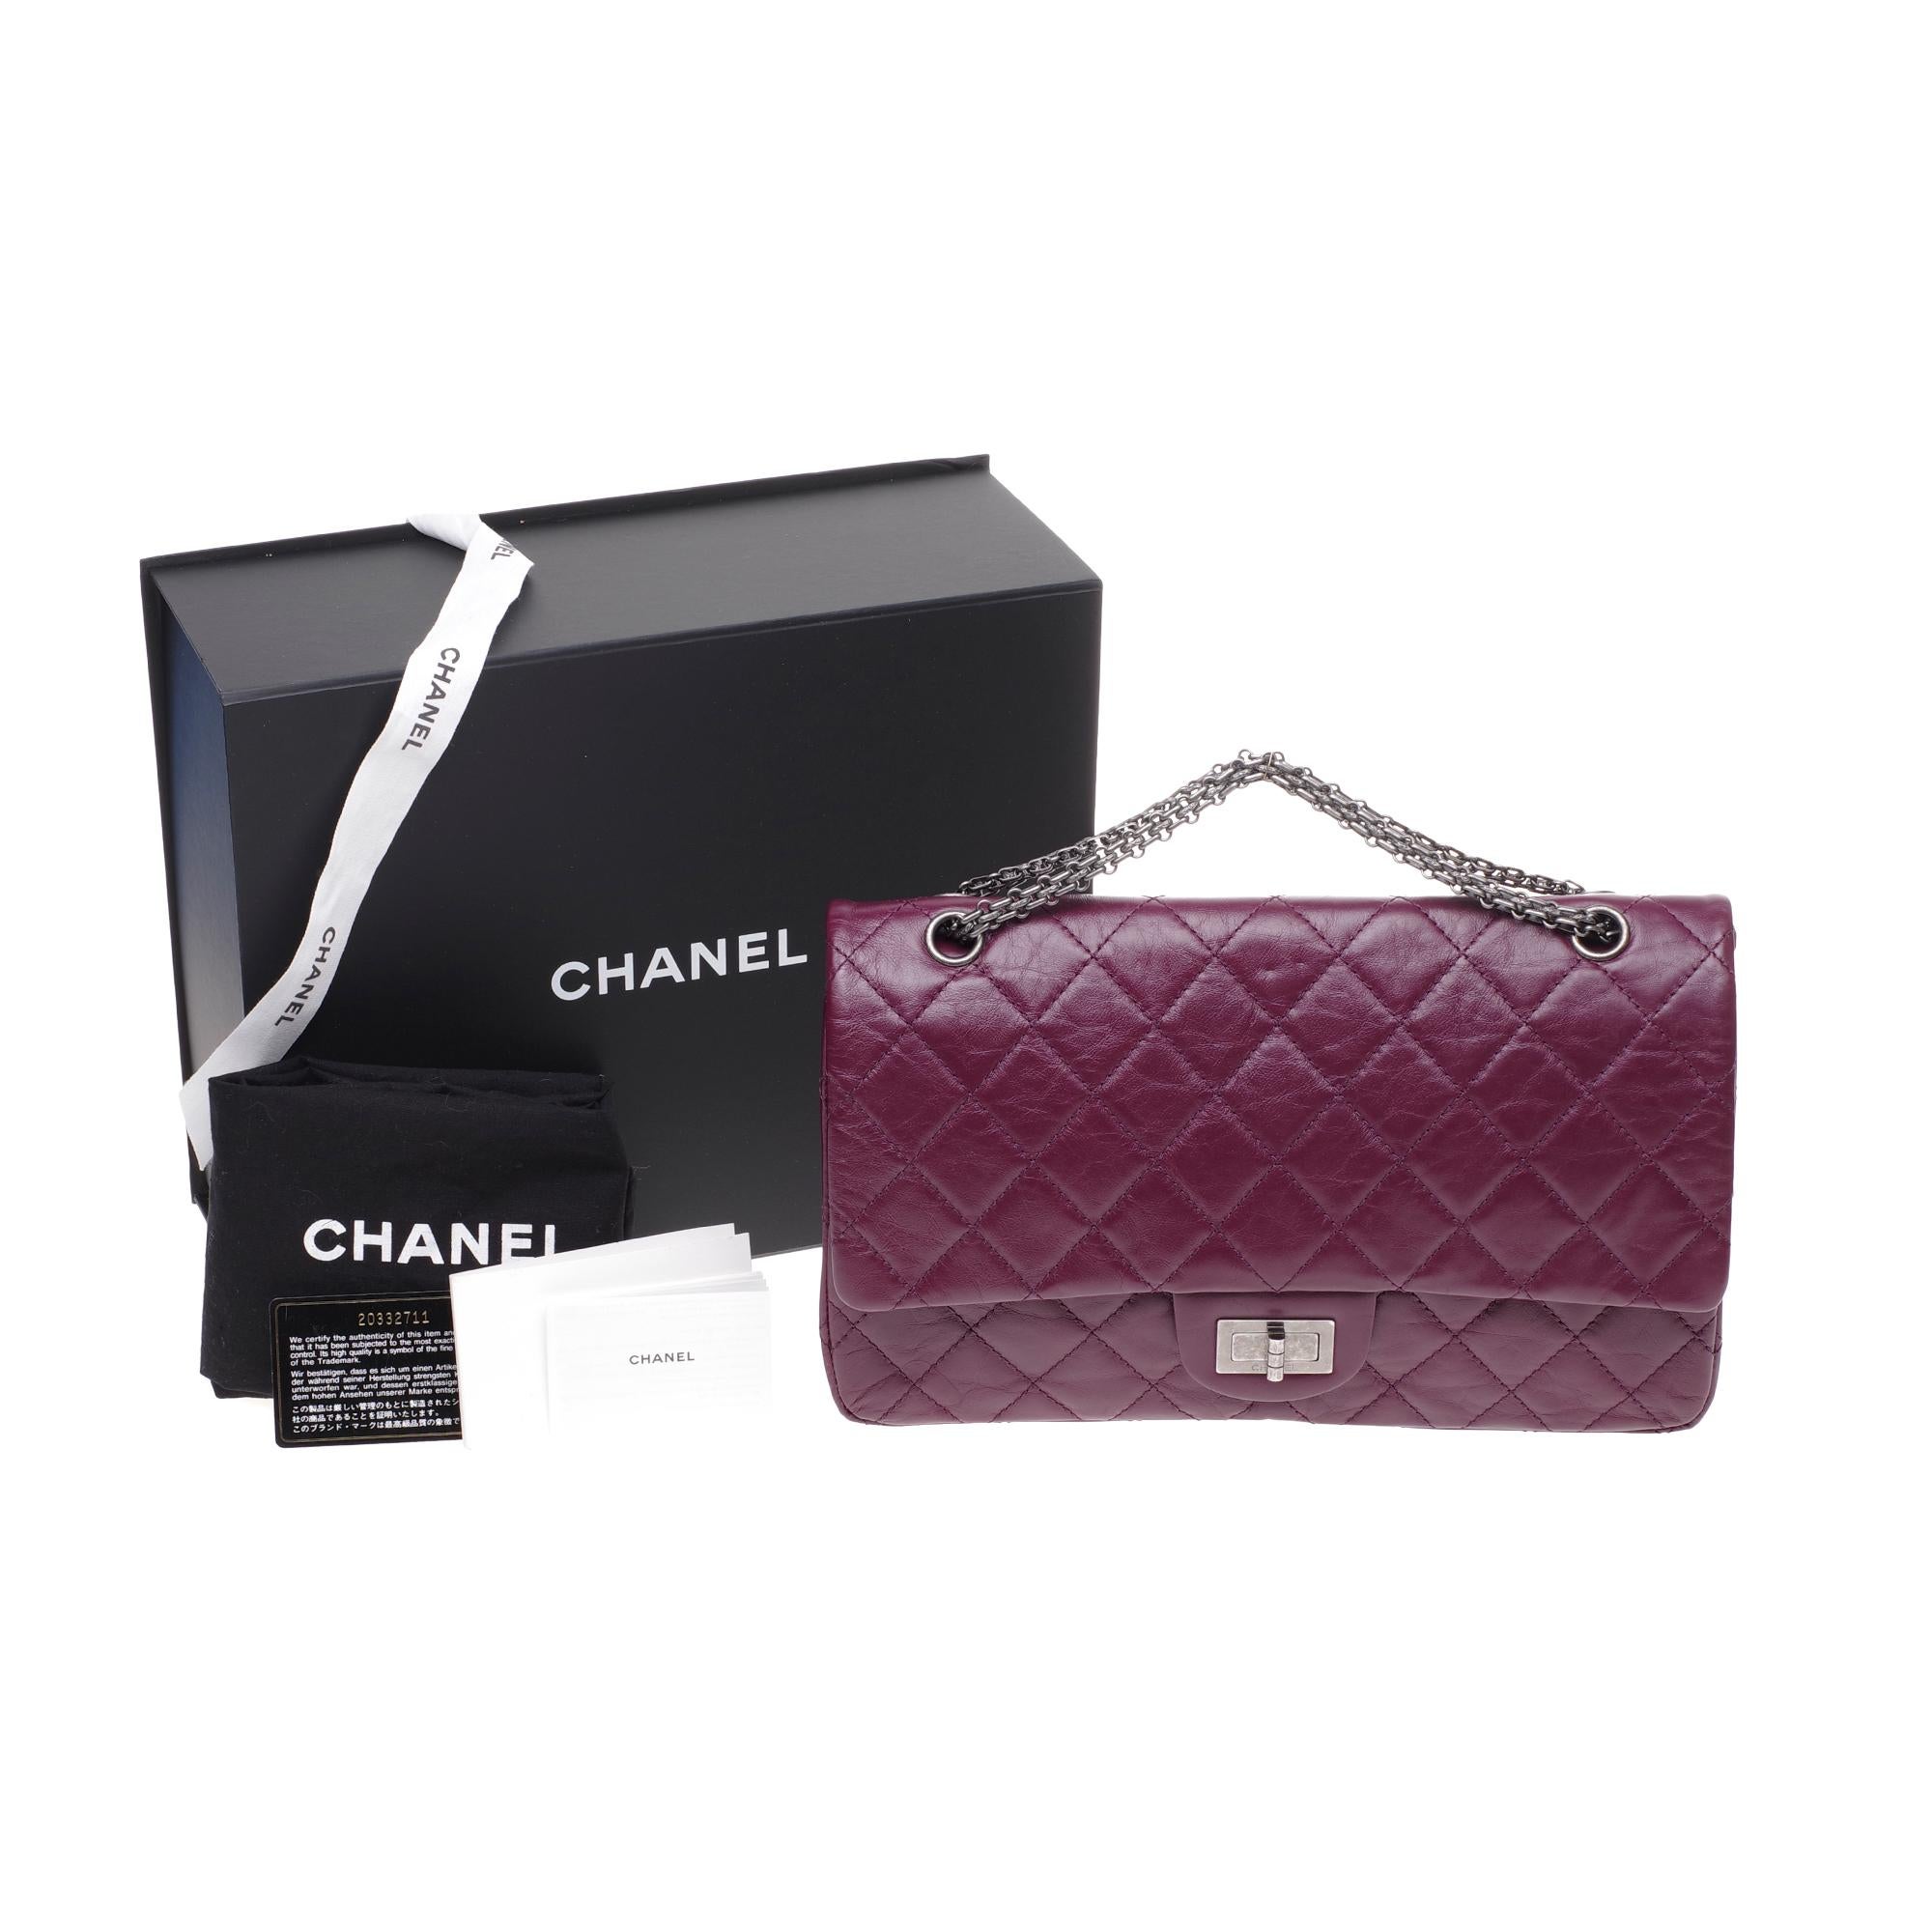 Amazing Chanel 2.55 Reissue handbag in plum quilted leather 8